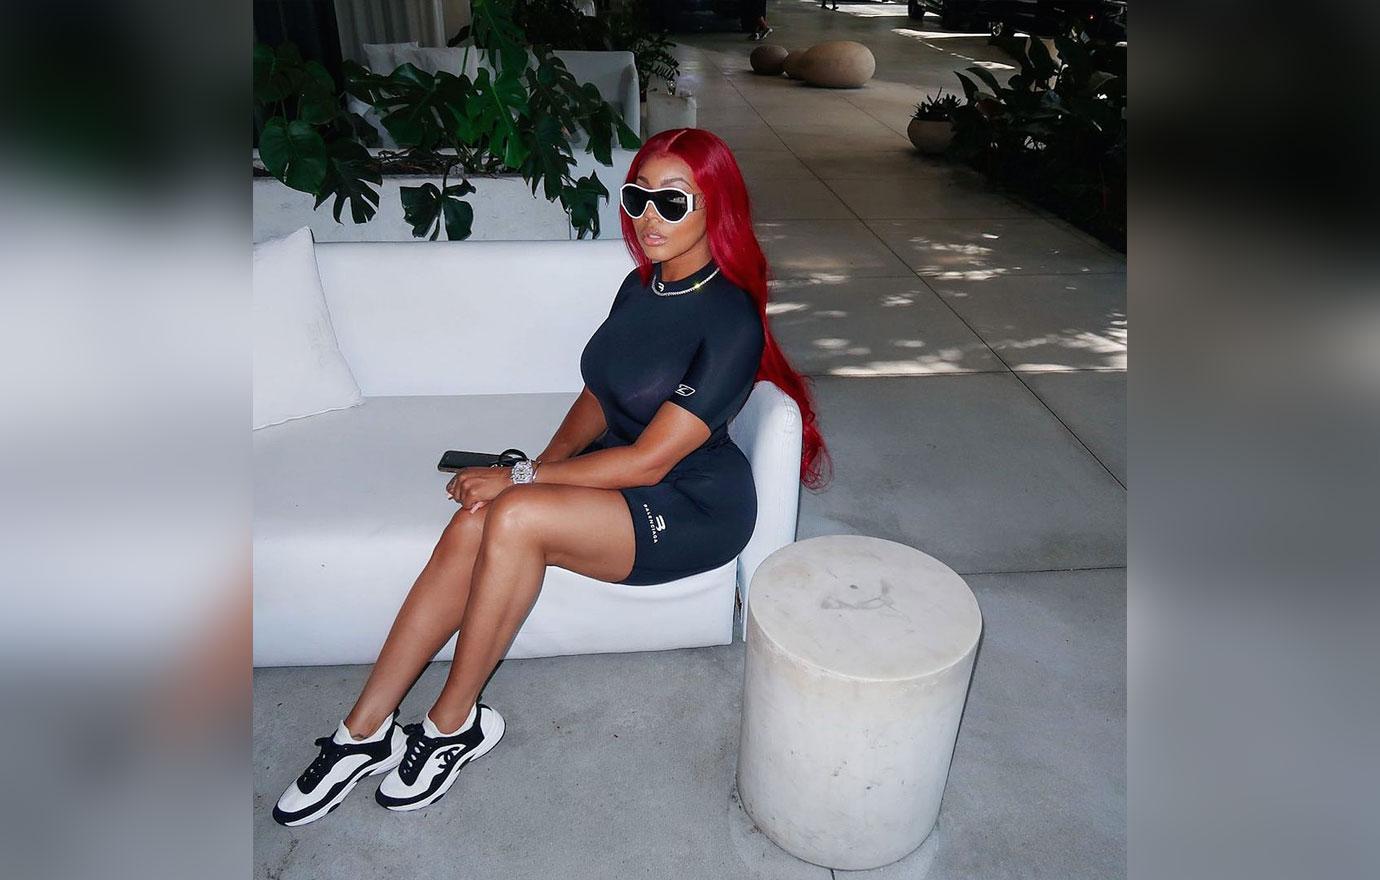 Future's Baby Mama, Brittni Mealy, Leaks Alleged Audio Of Rapper